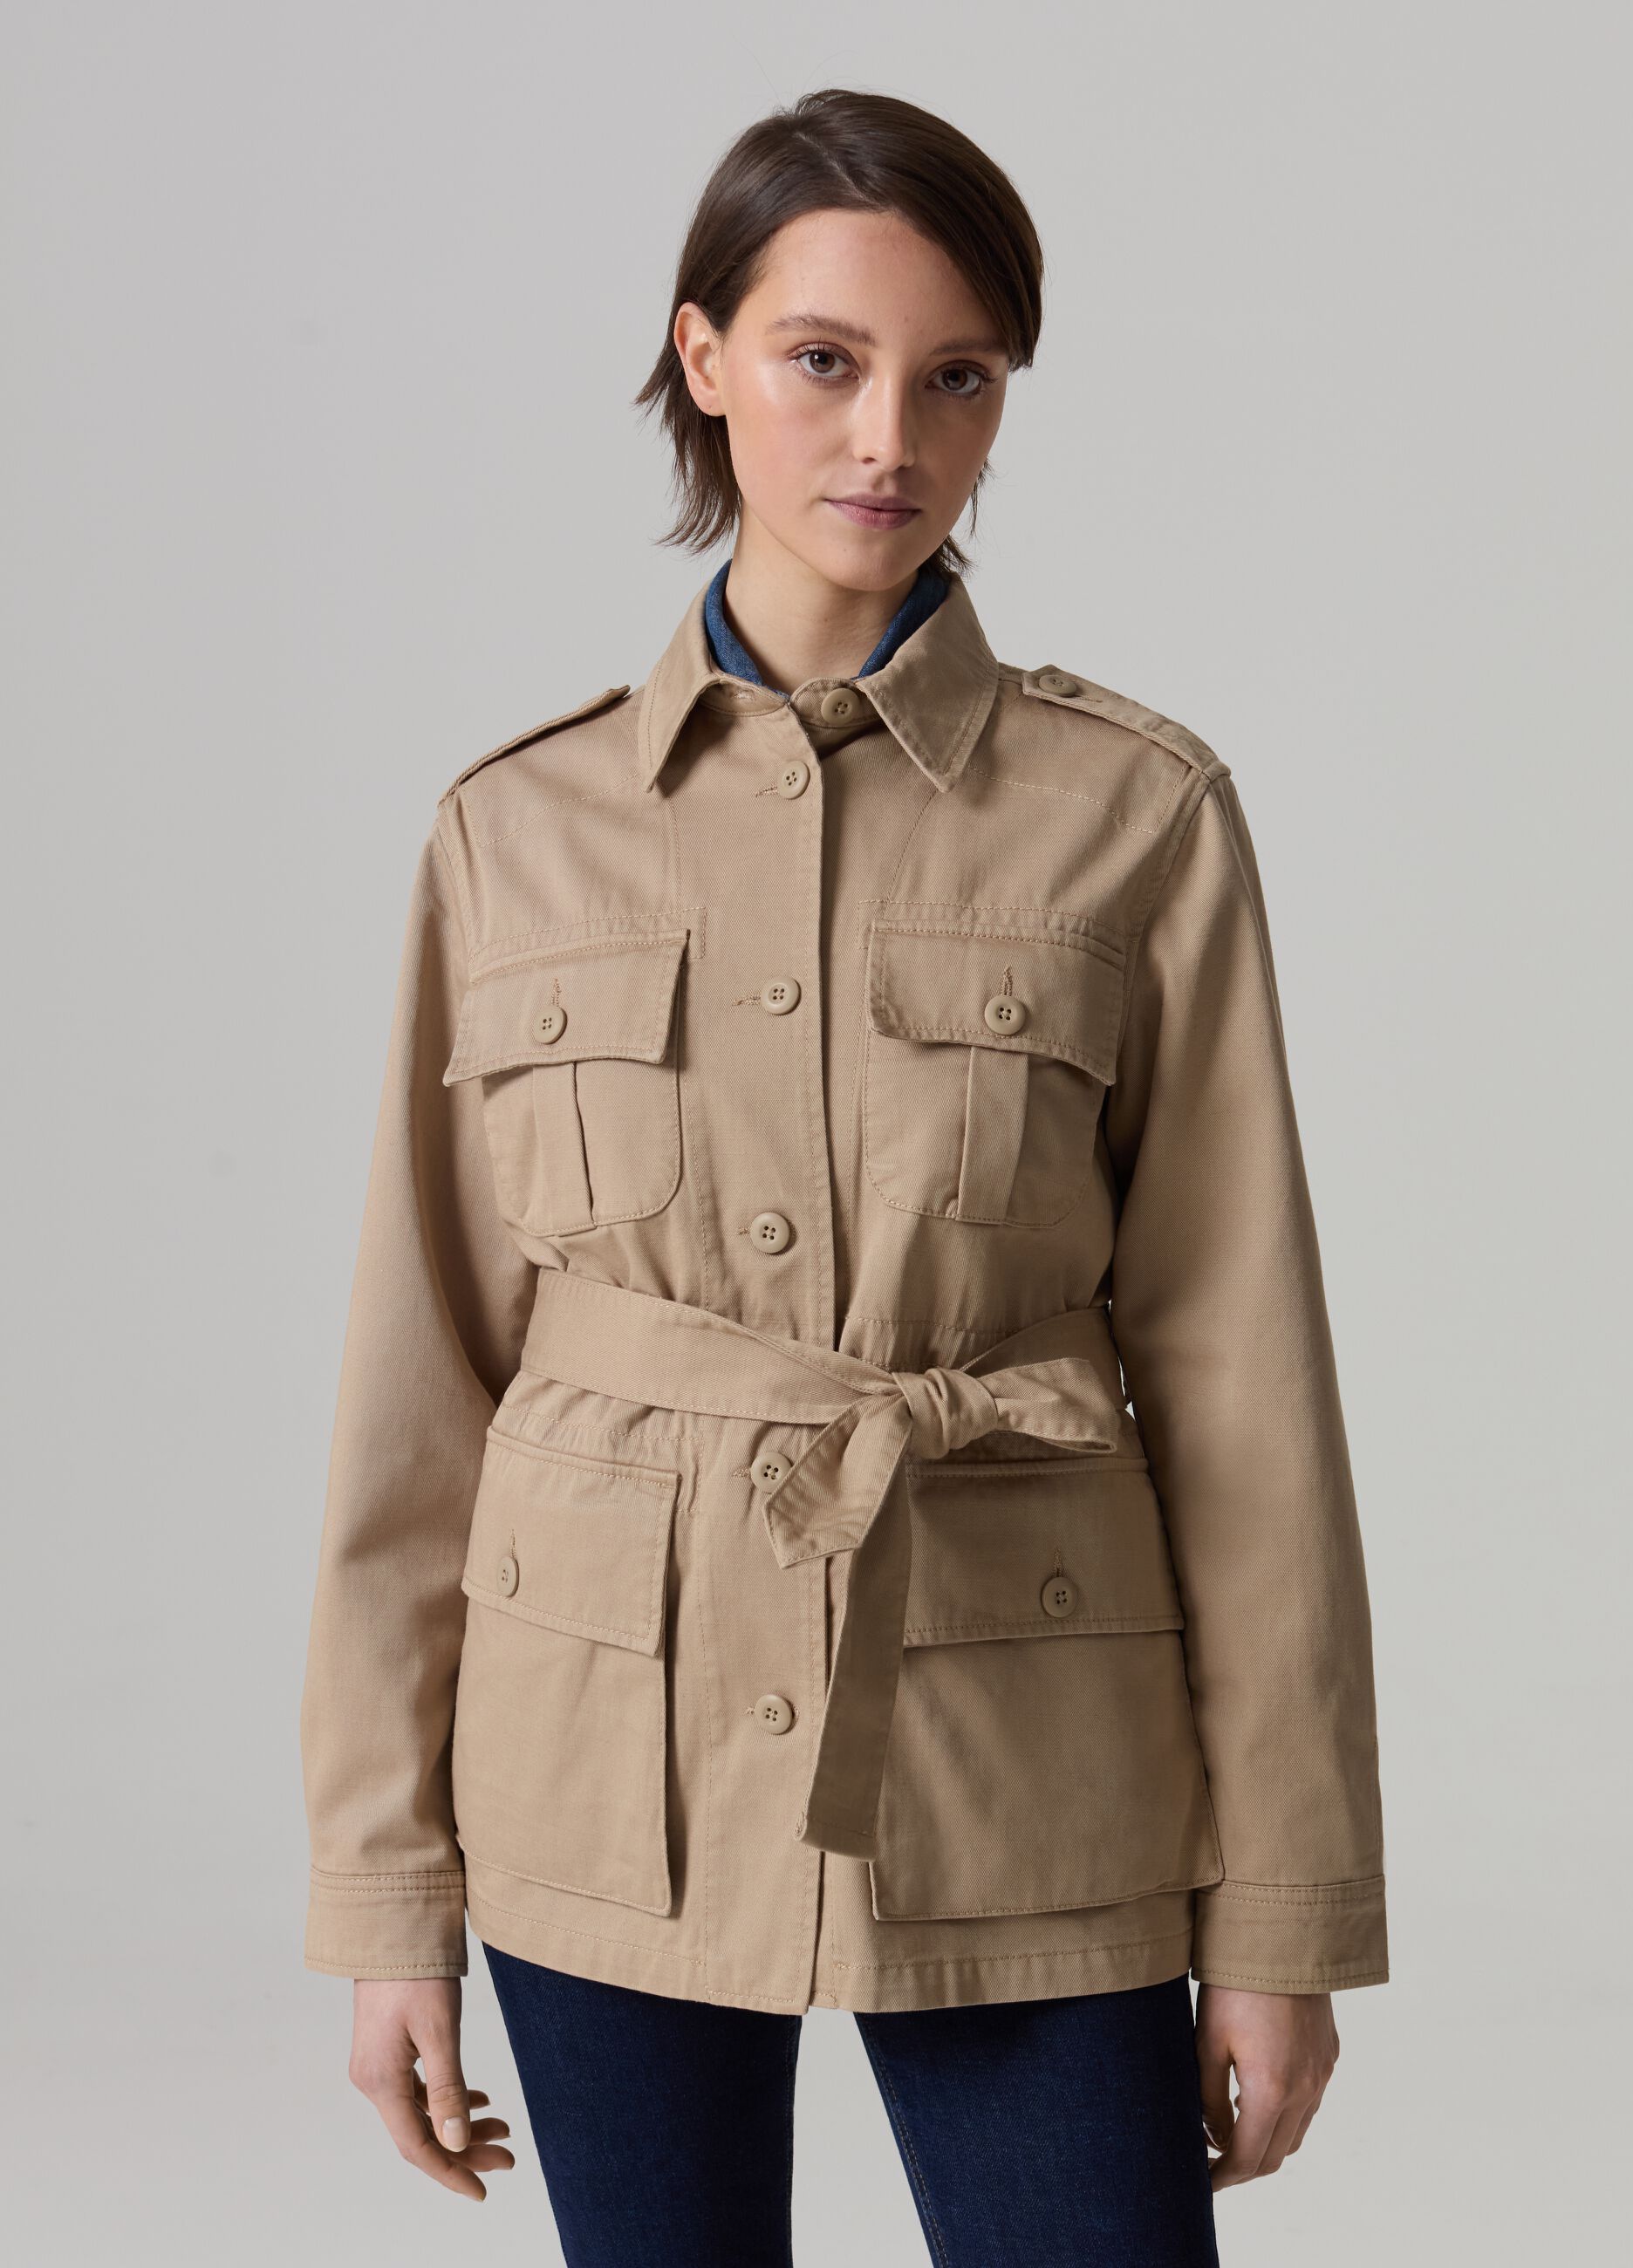 Safari jacket with buttons and belt